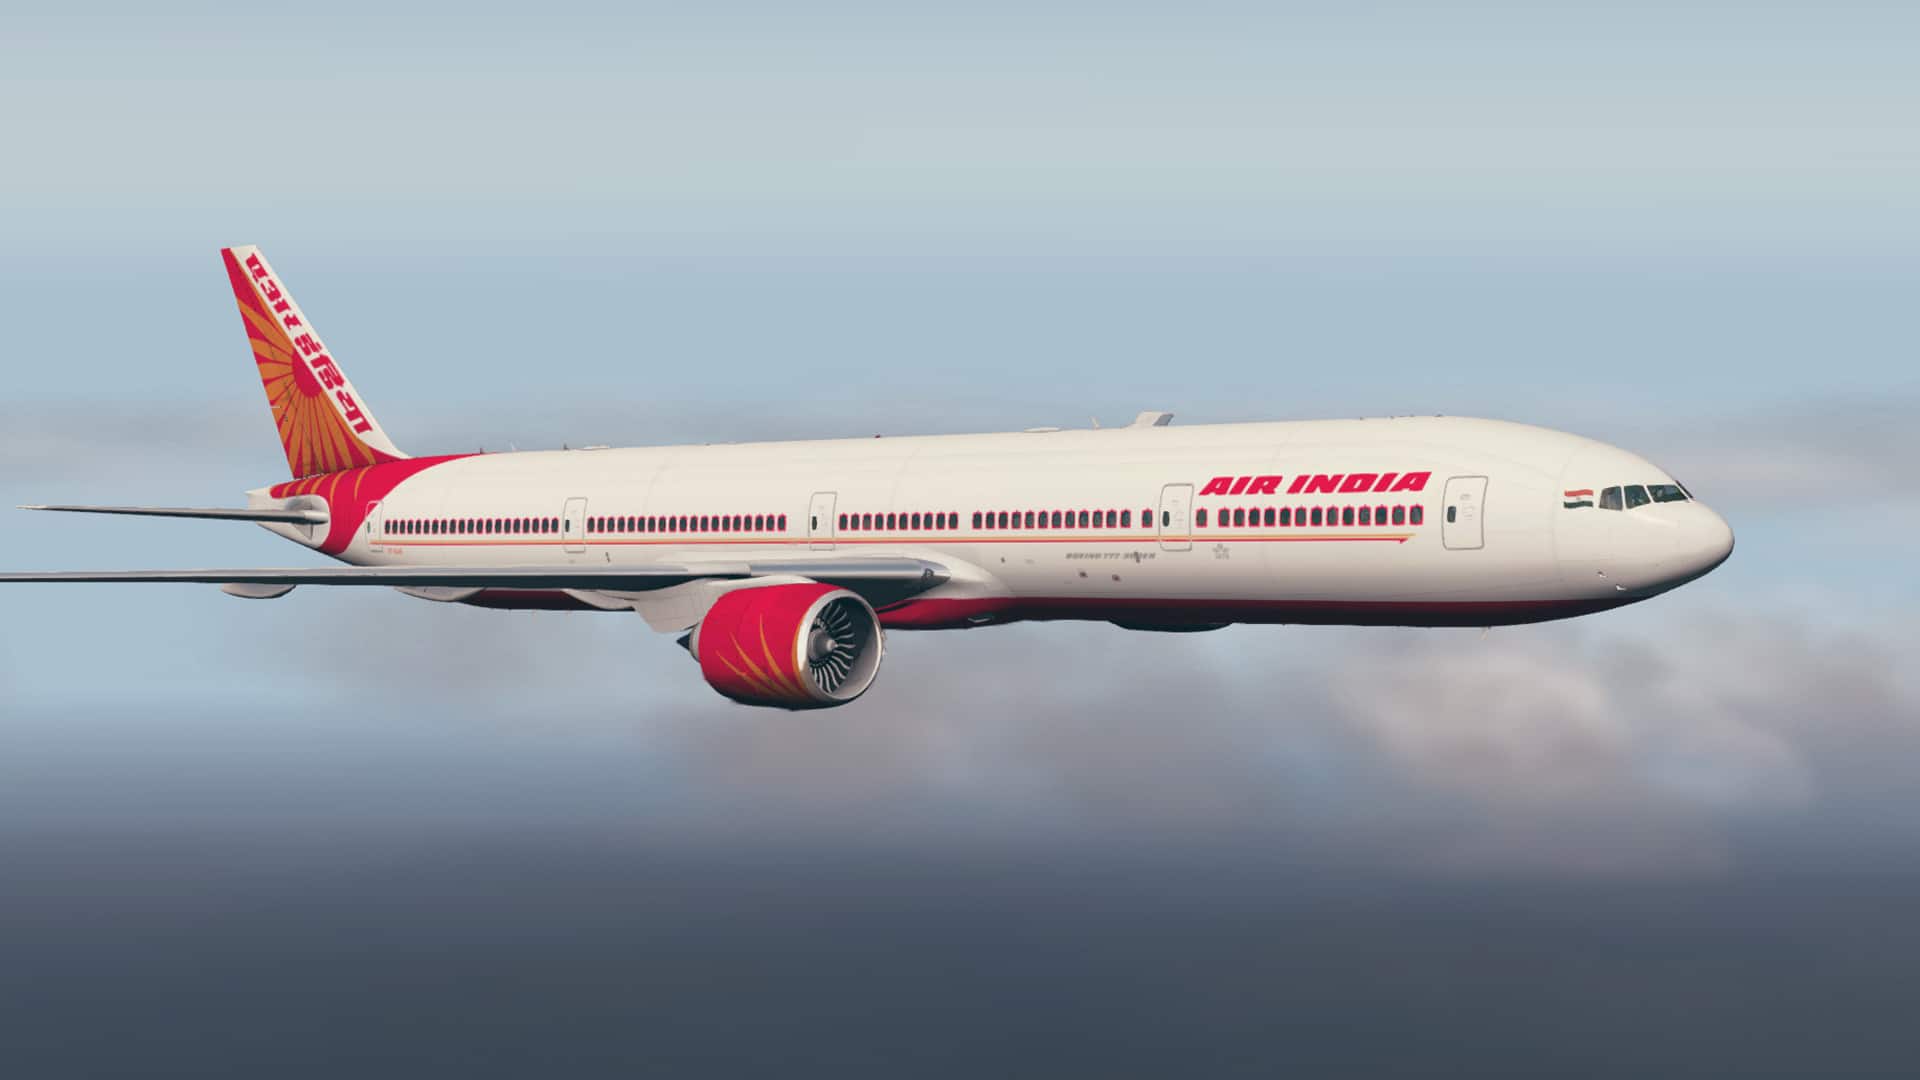 DGCA slaps Rs 30 lakh fine on Air India, suspends pilot license for 3 mths in New York-Delhi flight urination incident